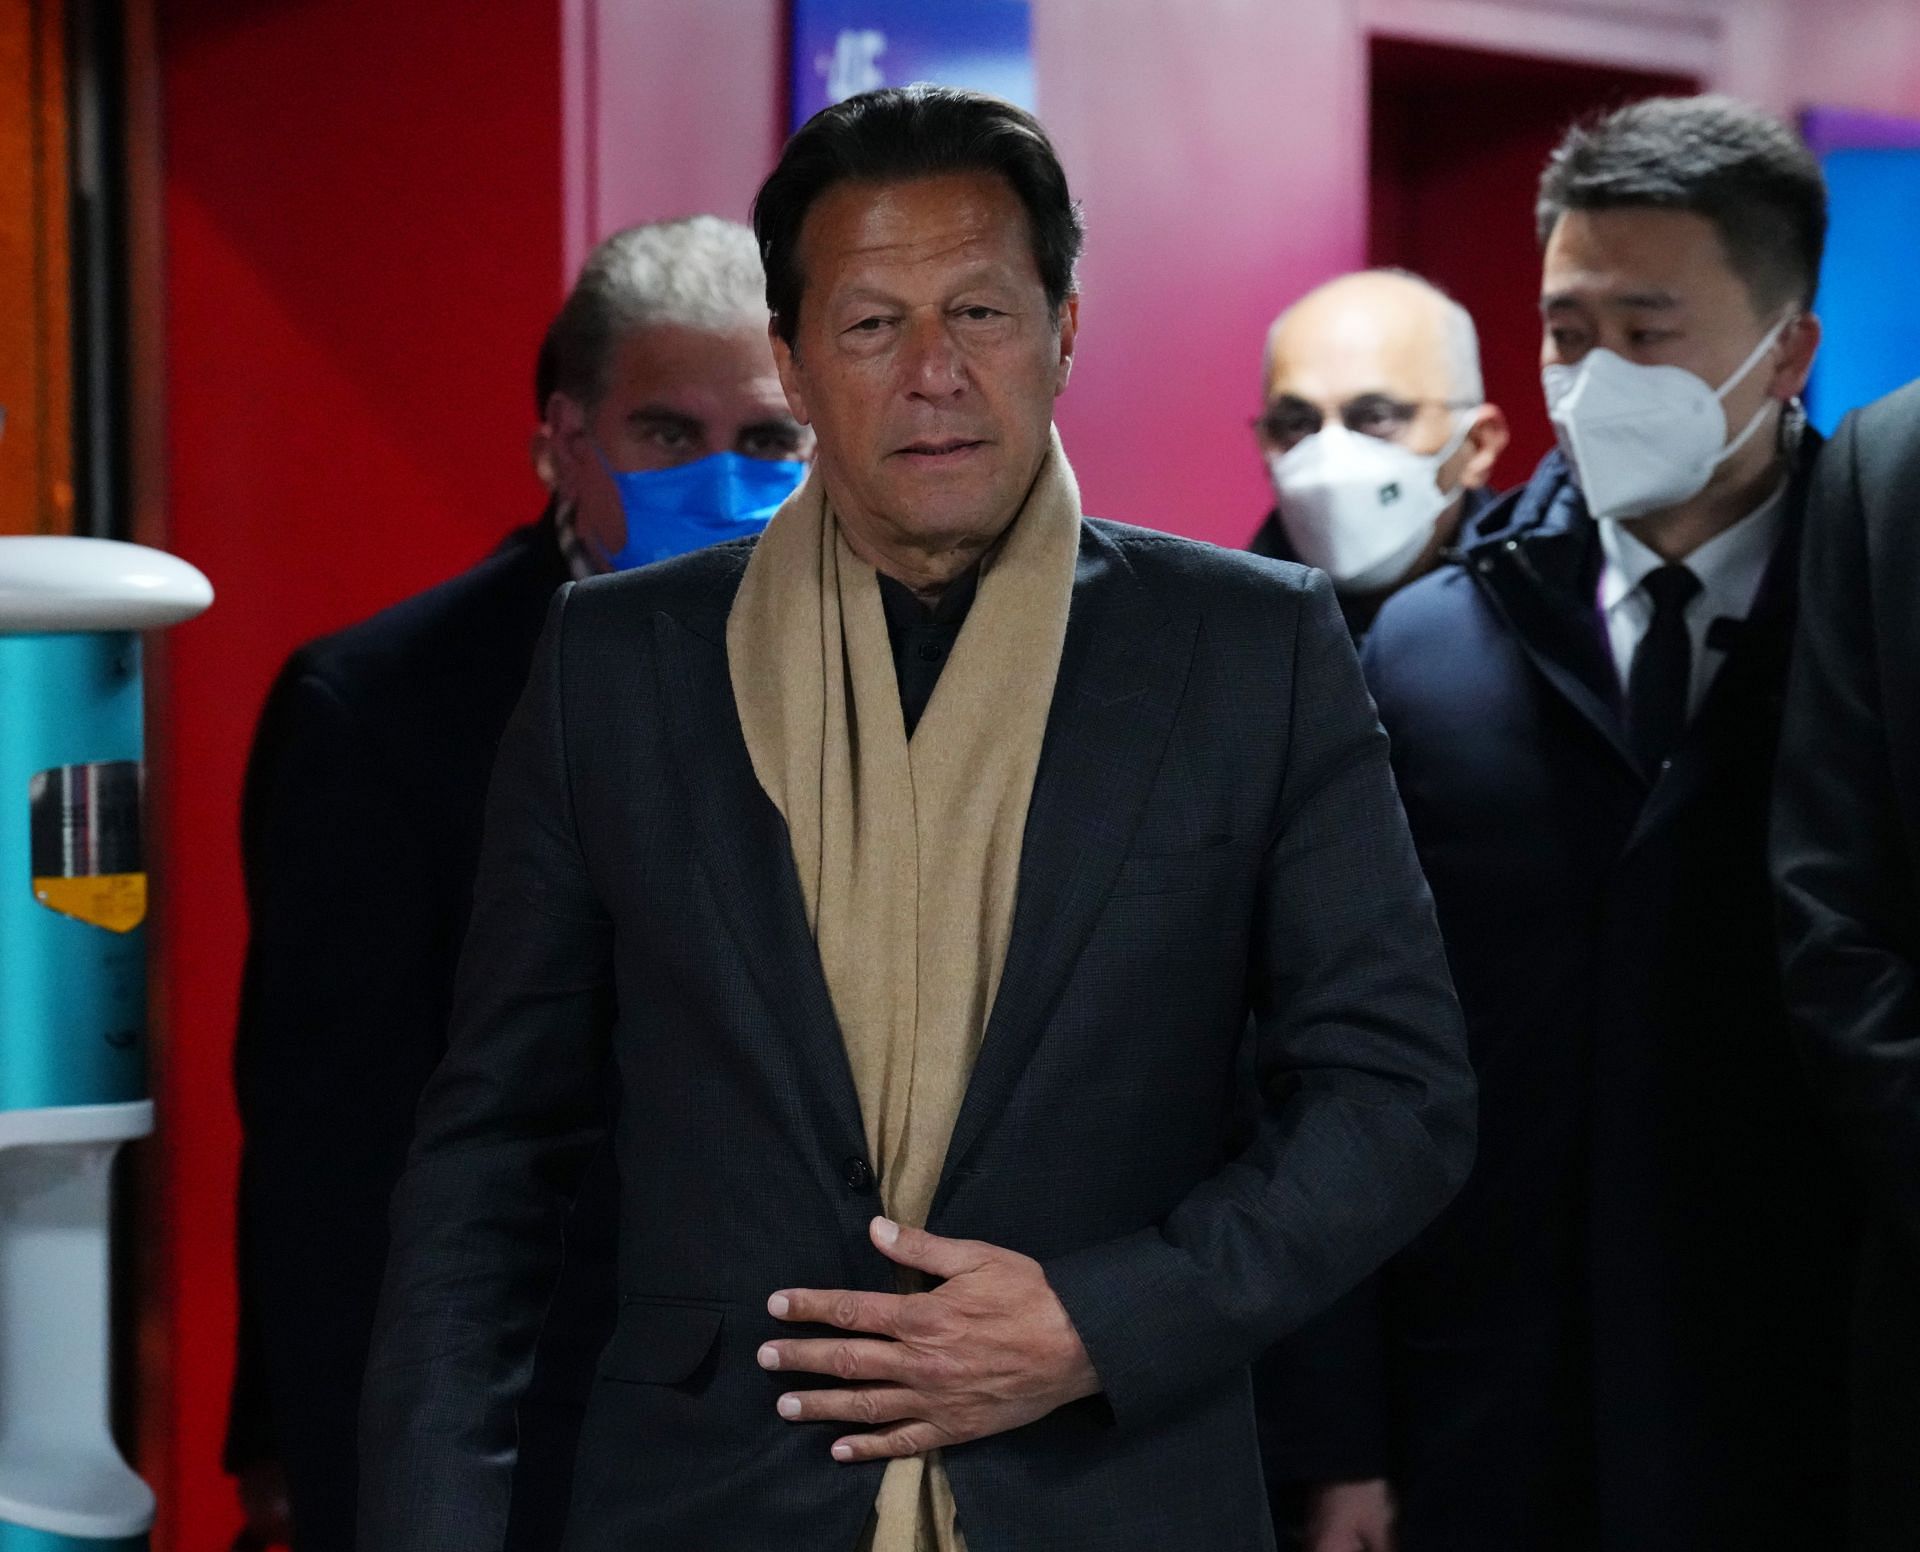 Imran Khan, the former PM of Pakistan (Image via Getty Images)